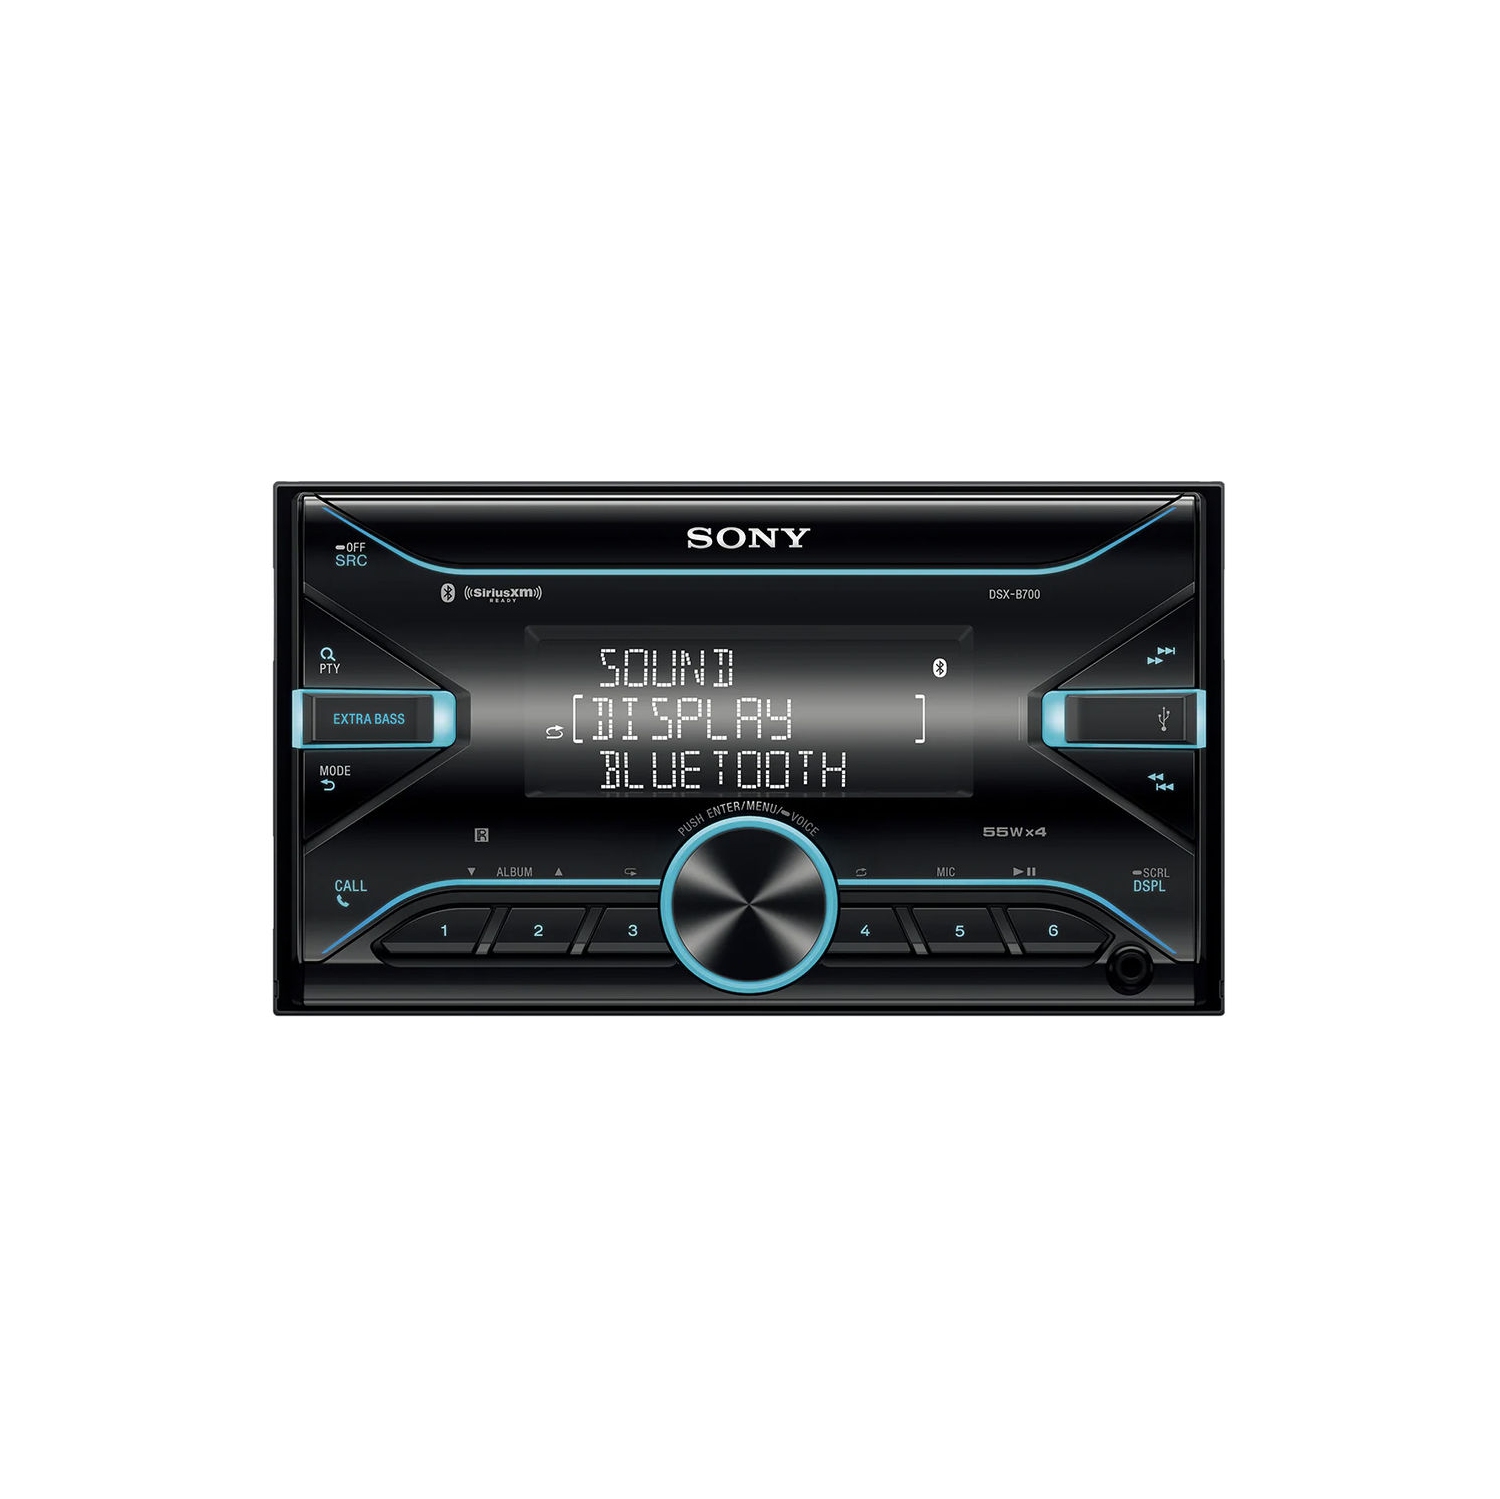 Sony DSX-B700 Double DIN In-Dash Bluetooth Digital Media Car Stereo Receiver (Does Not Play CDs)